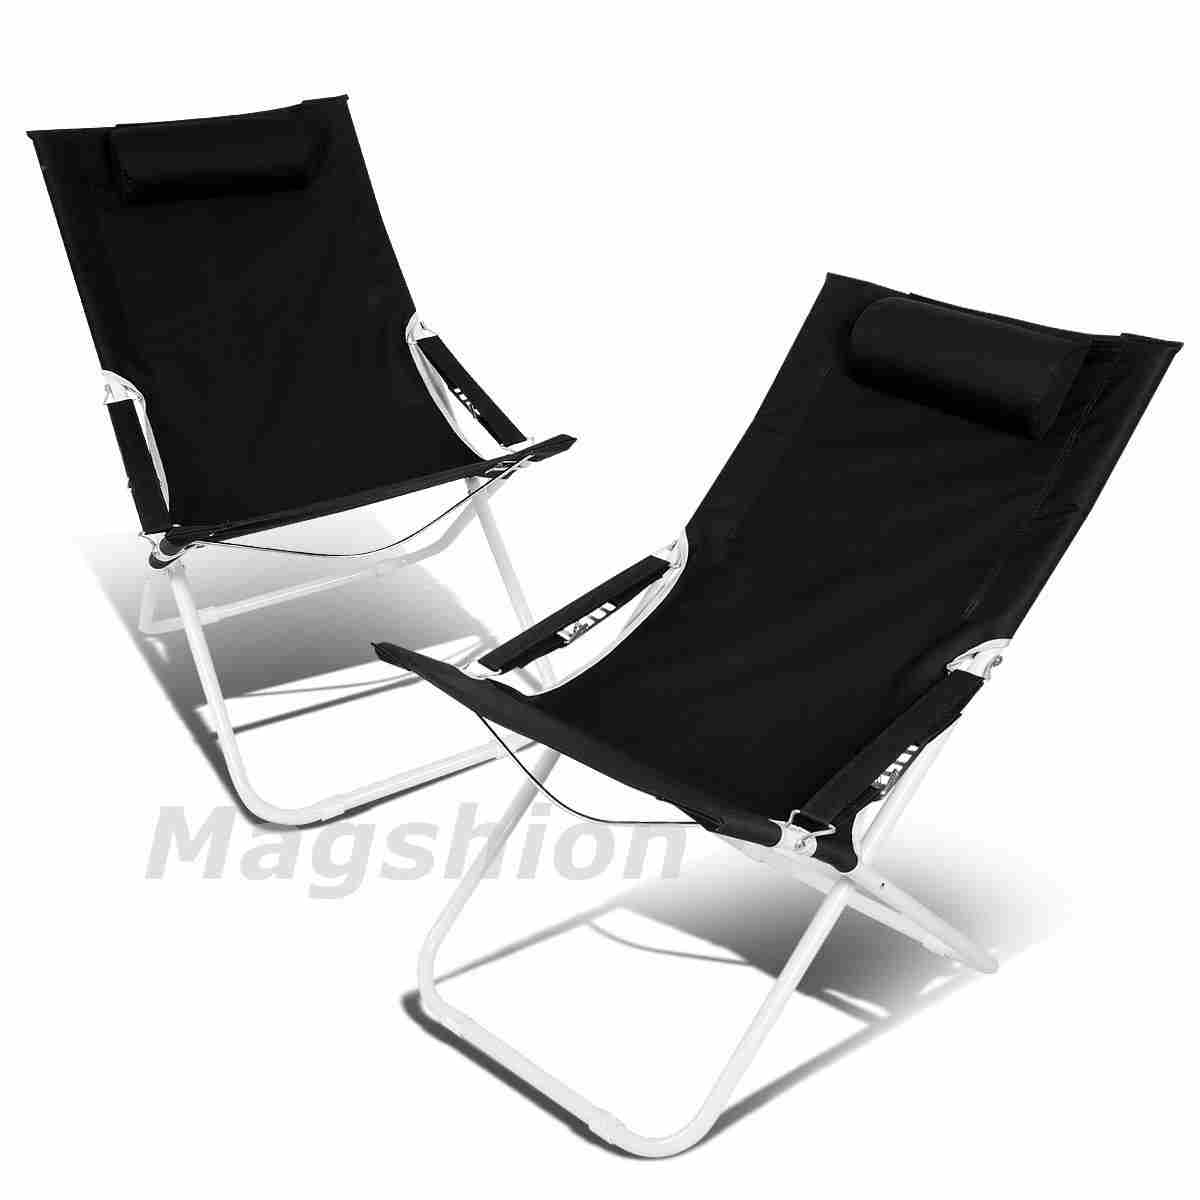 magshion-camping-chair-offers